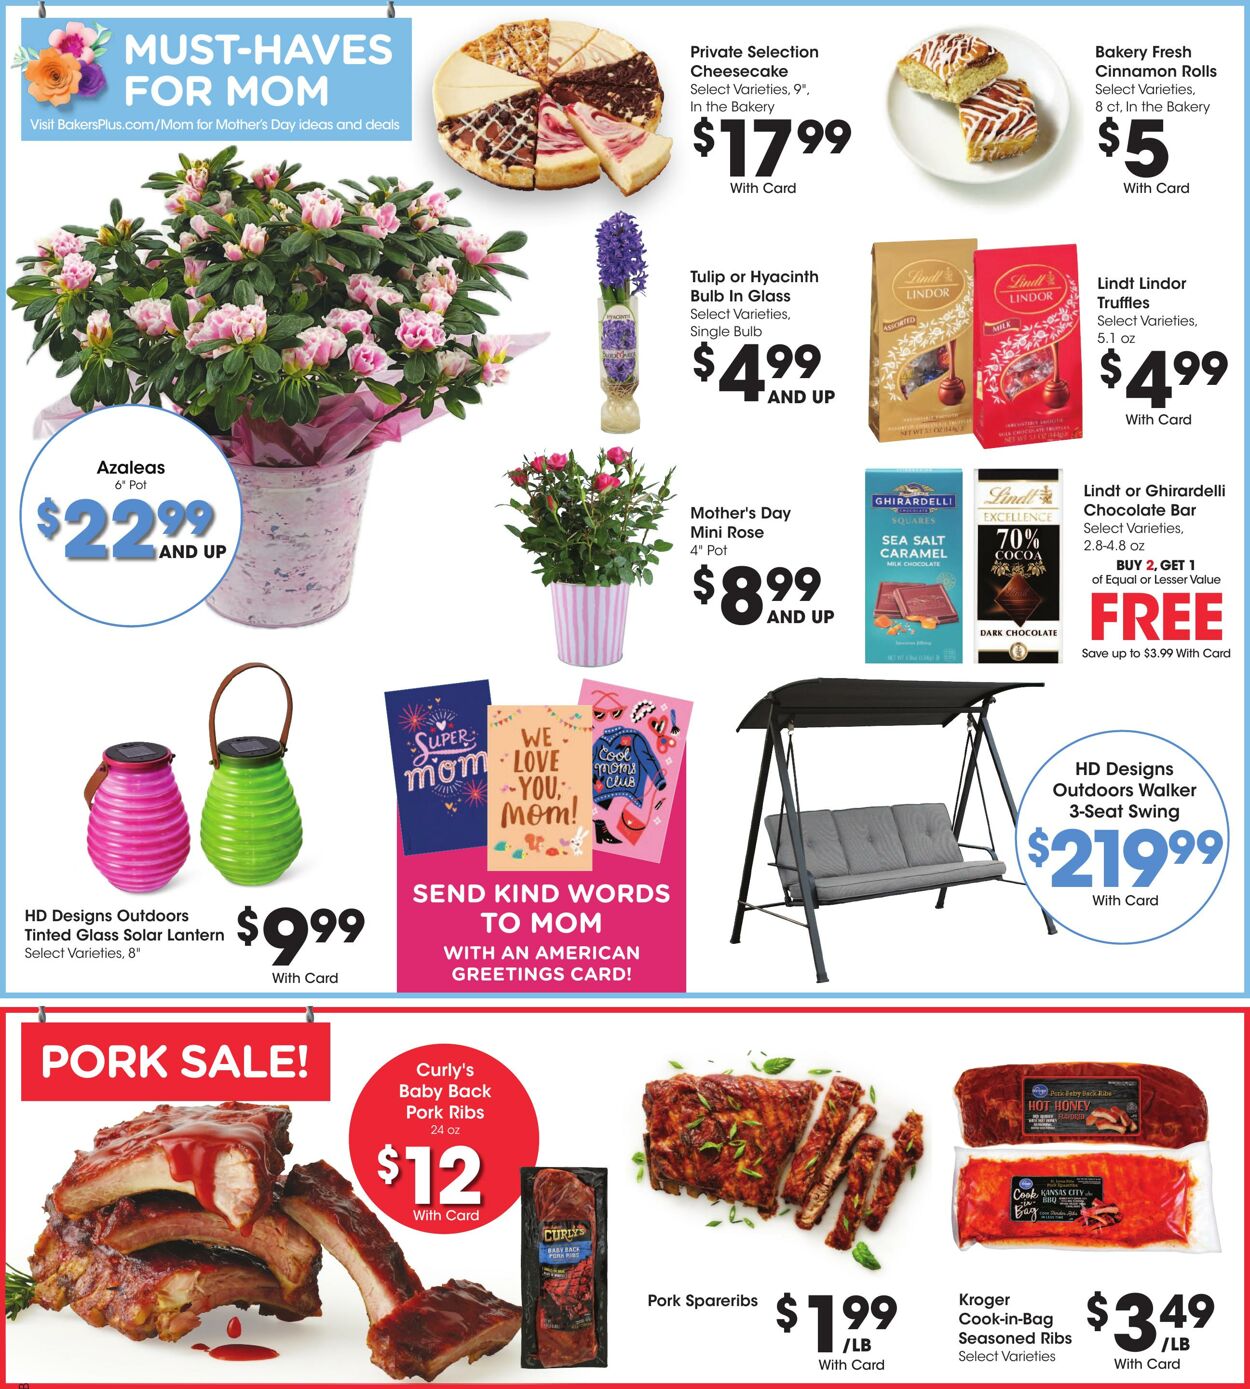 Weekly ad Baker's 05/01/2024 - 05/07/2024